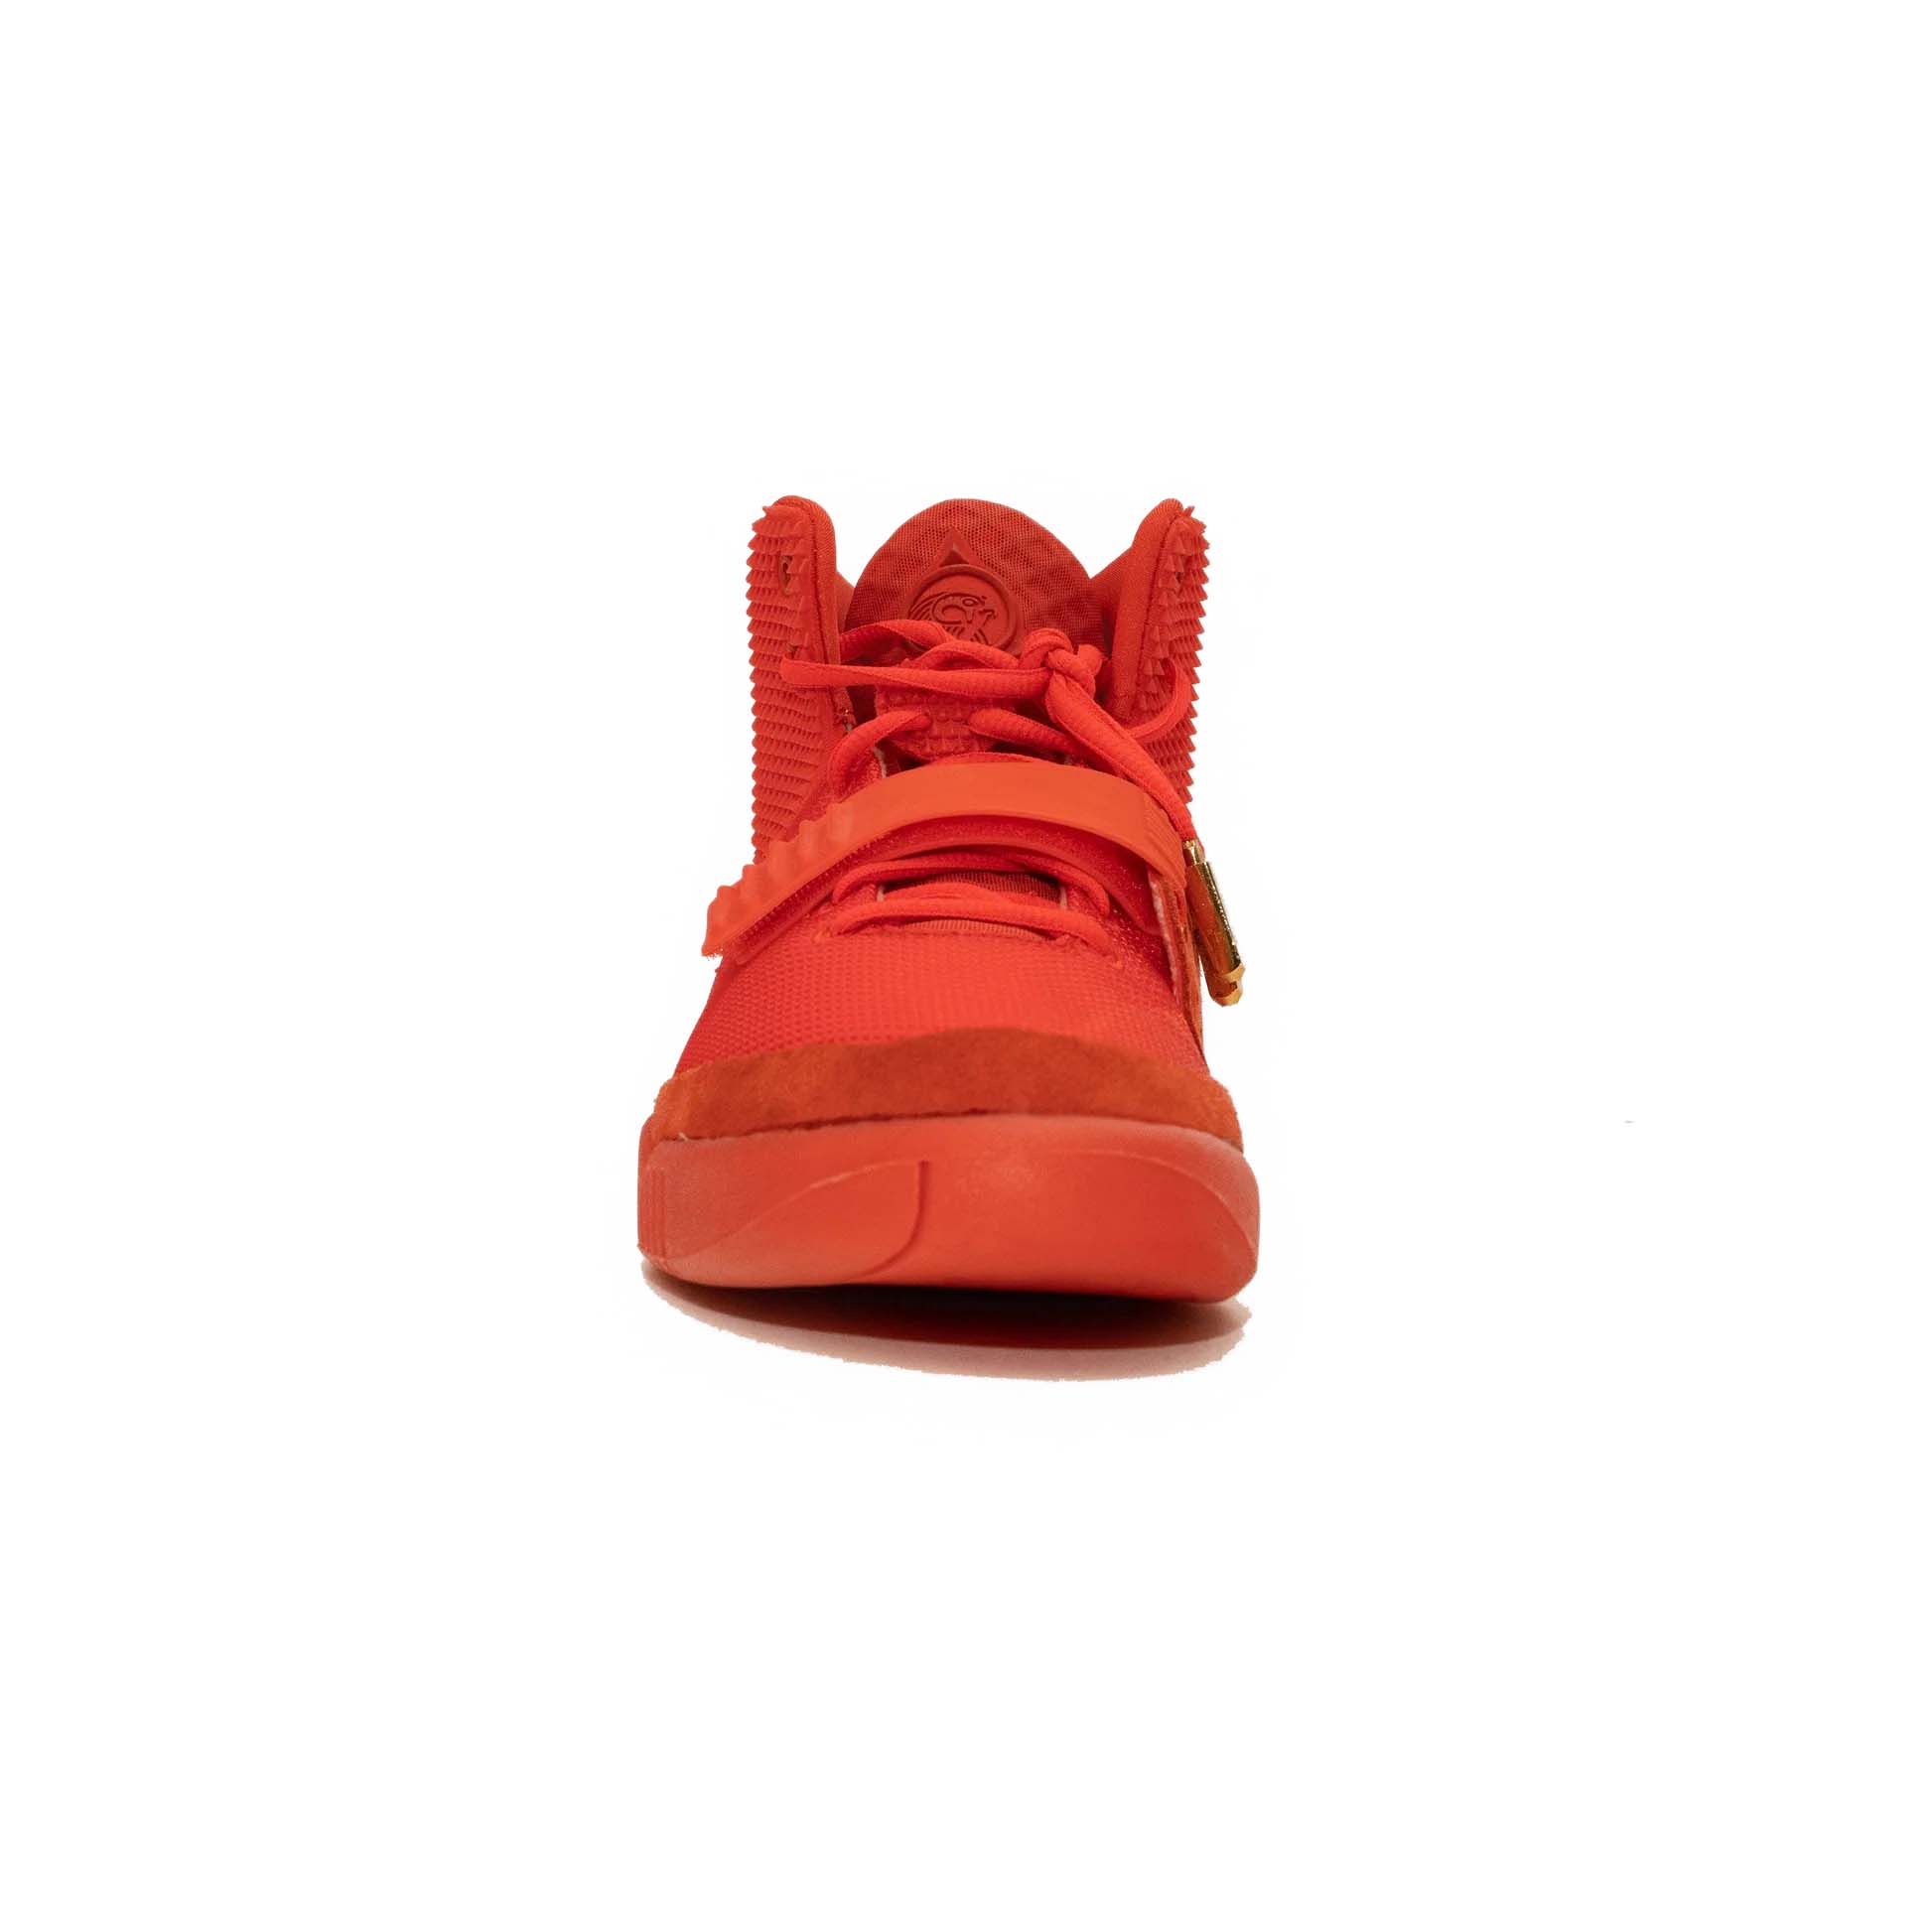 Nike Air Yeezy 2, SP Red October